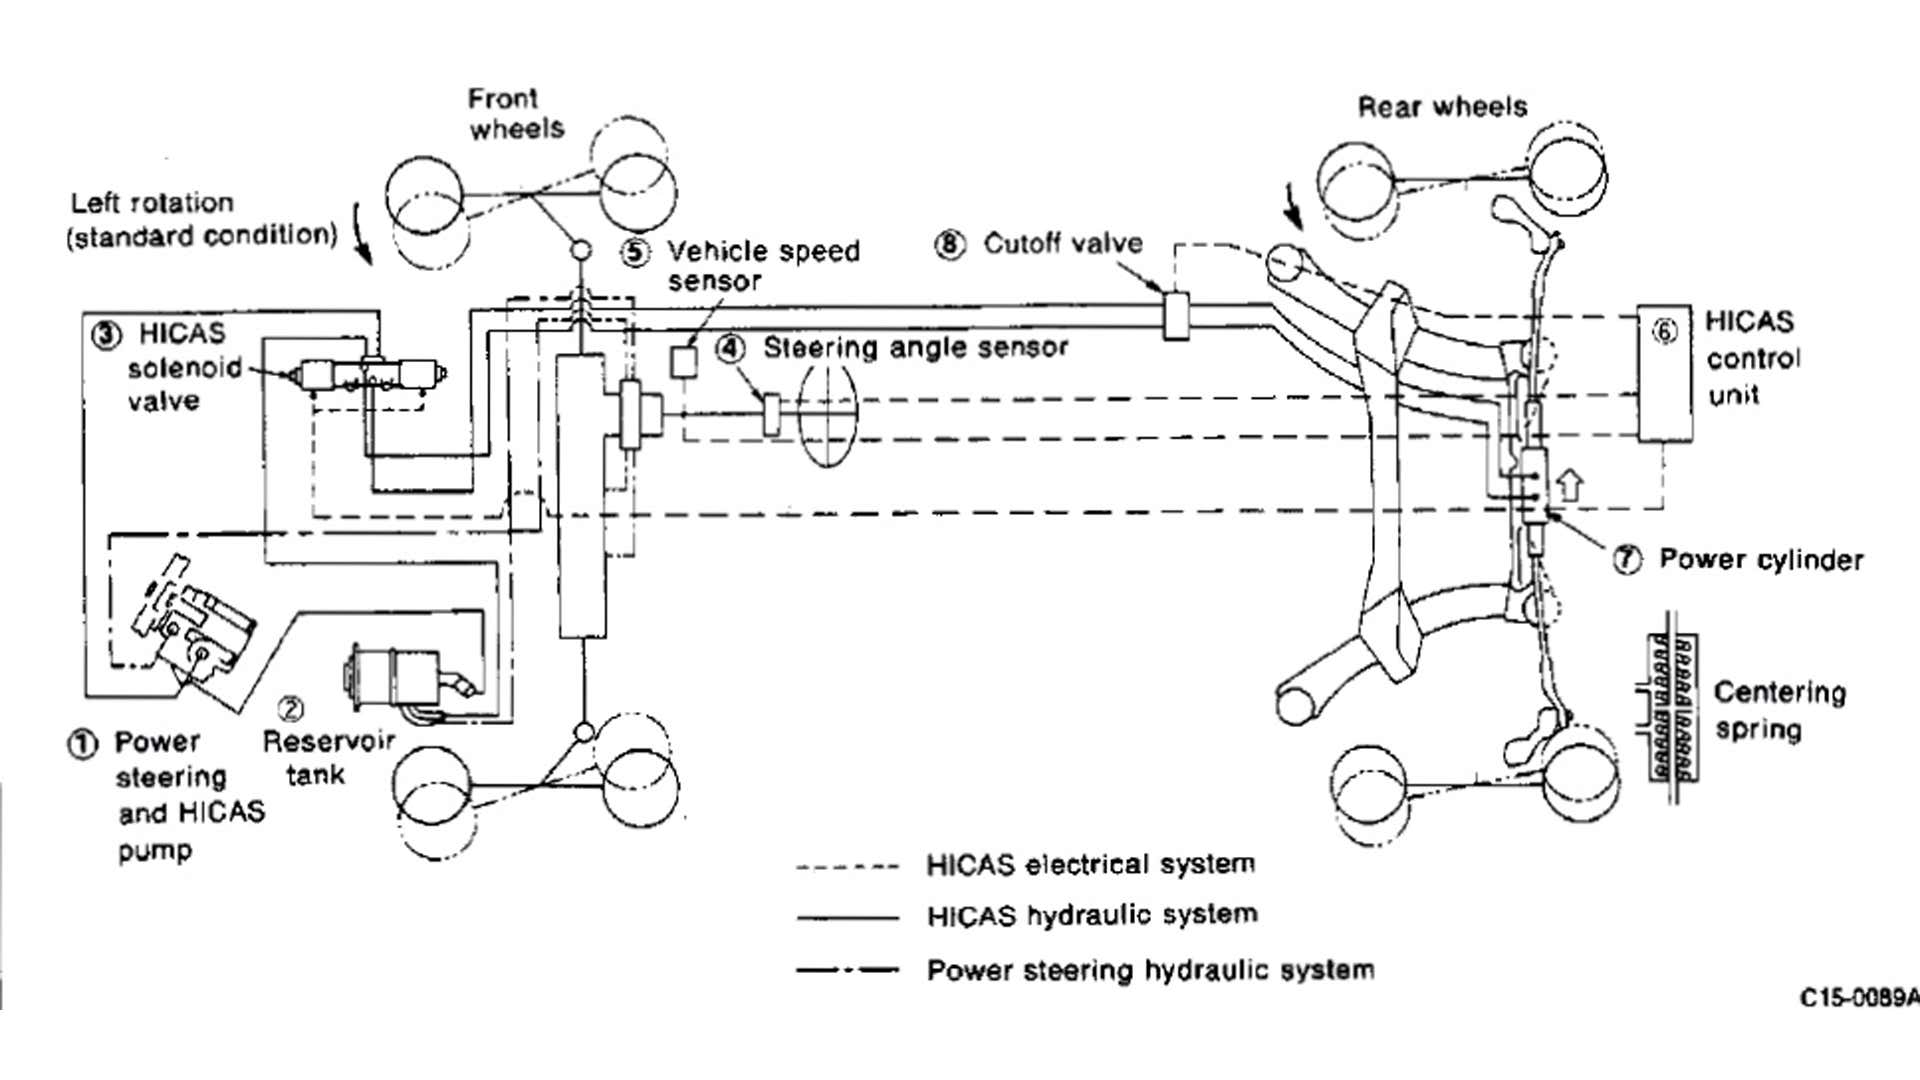 Nissan's technical diagram of HICAS